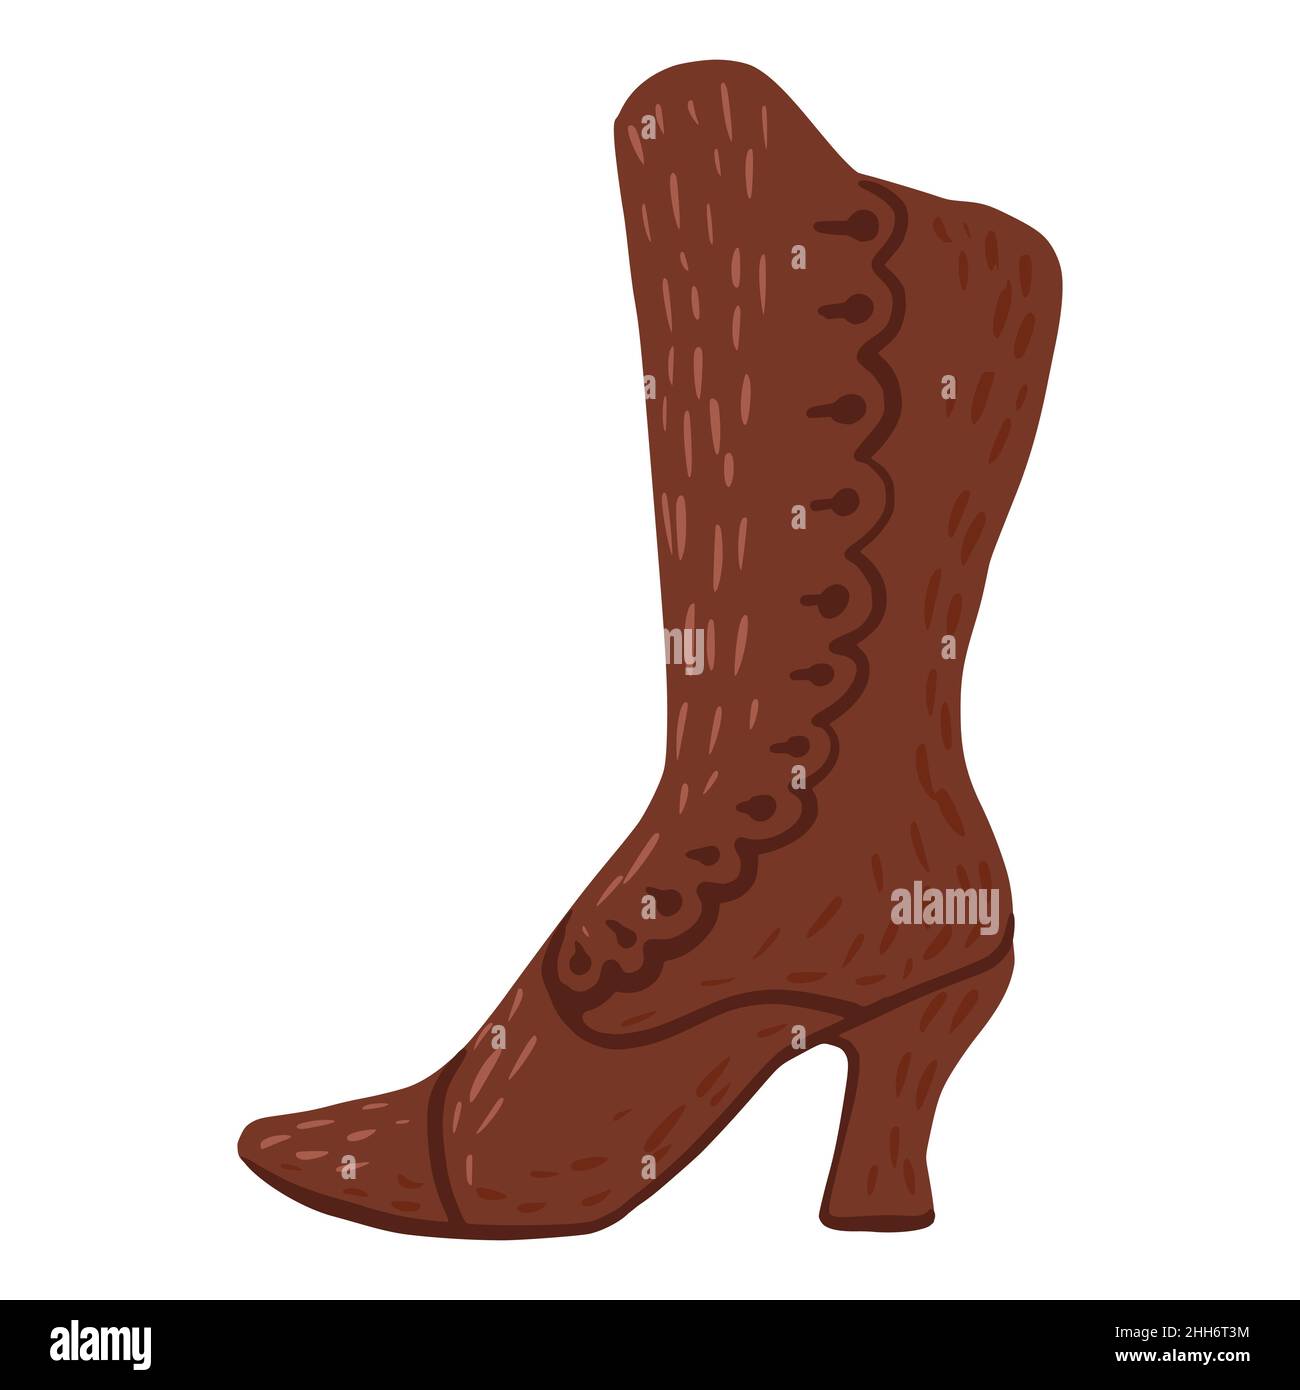 Antique boots isolated on white background. Vintage shoes brown color in doodle style vector illustration Stock Vector